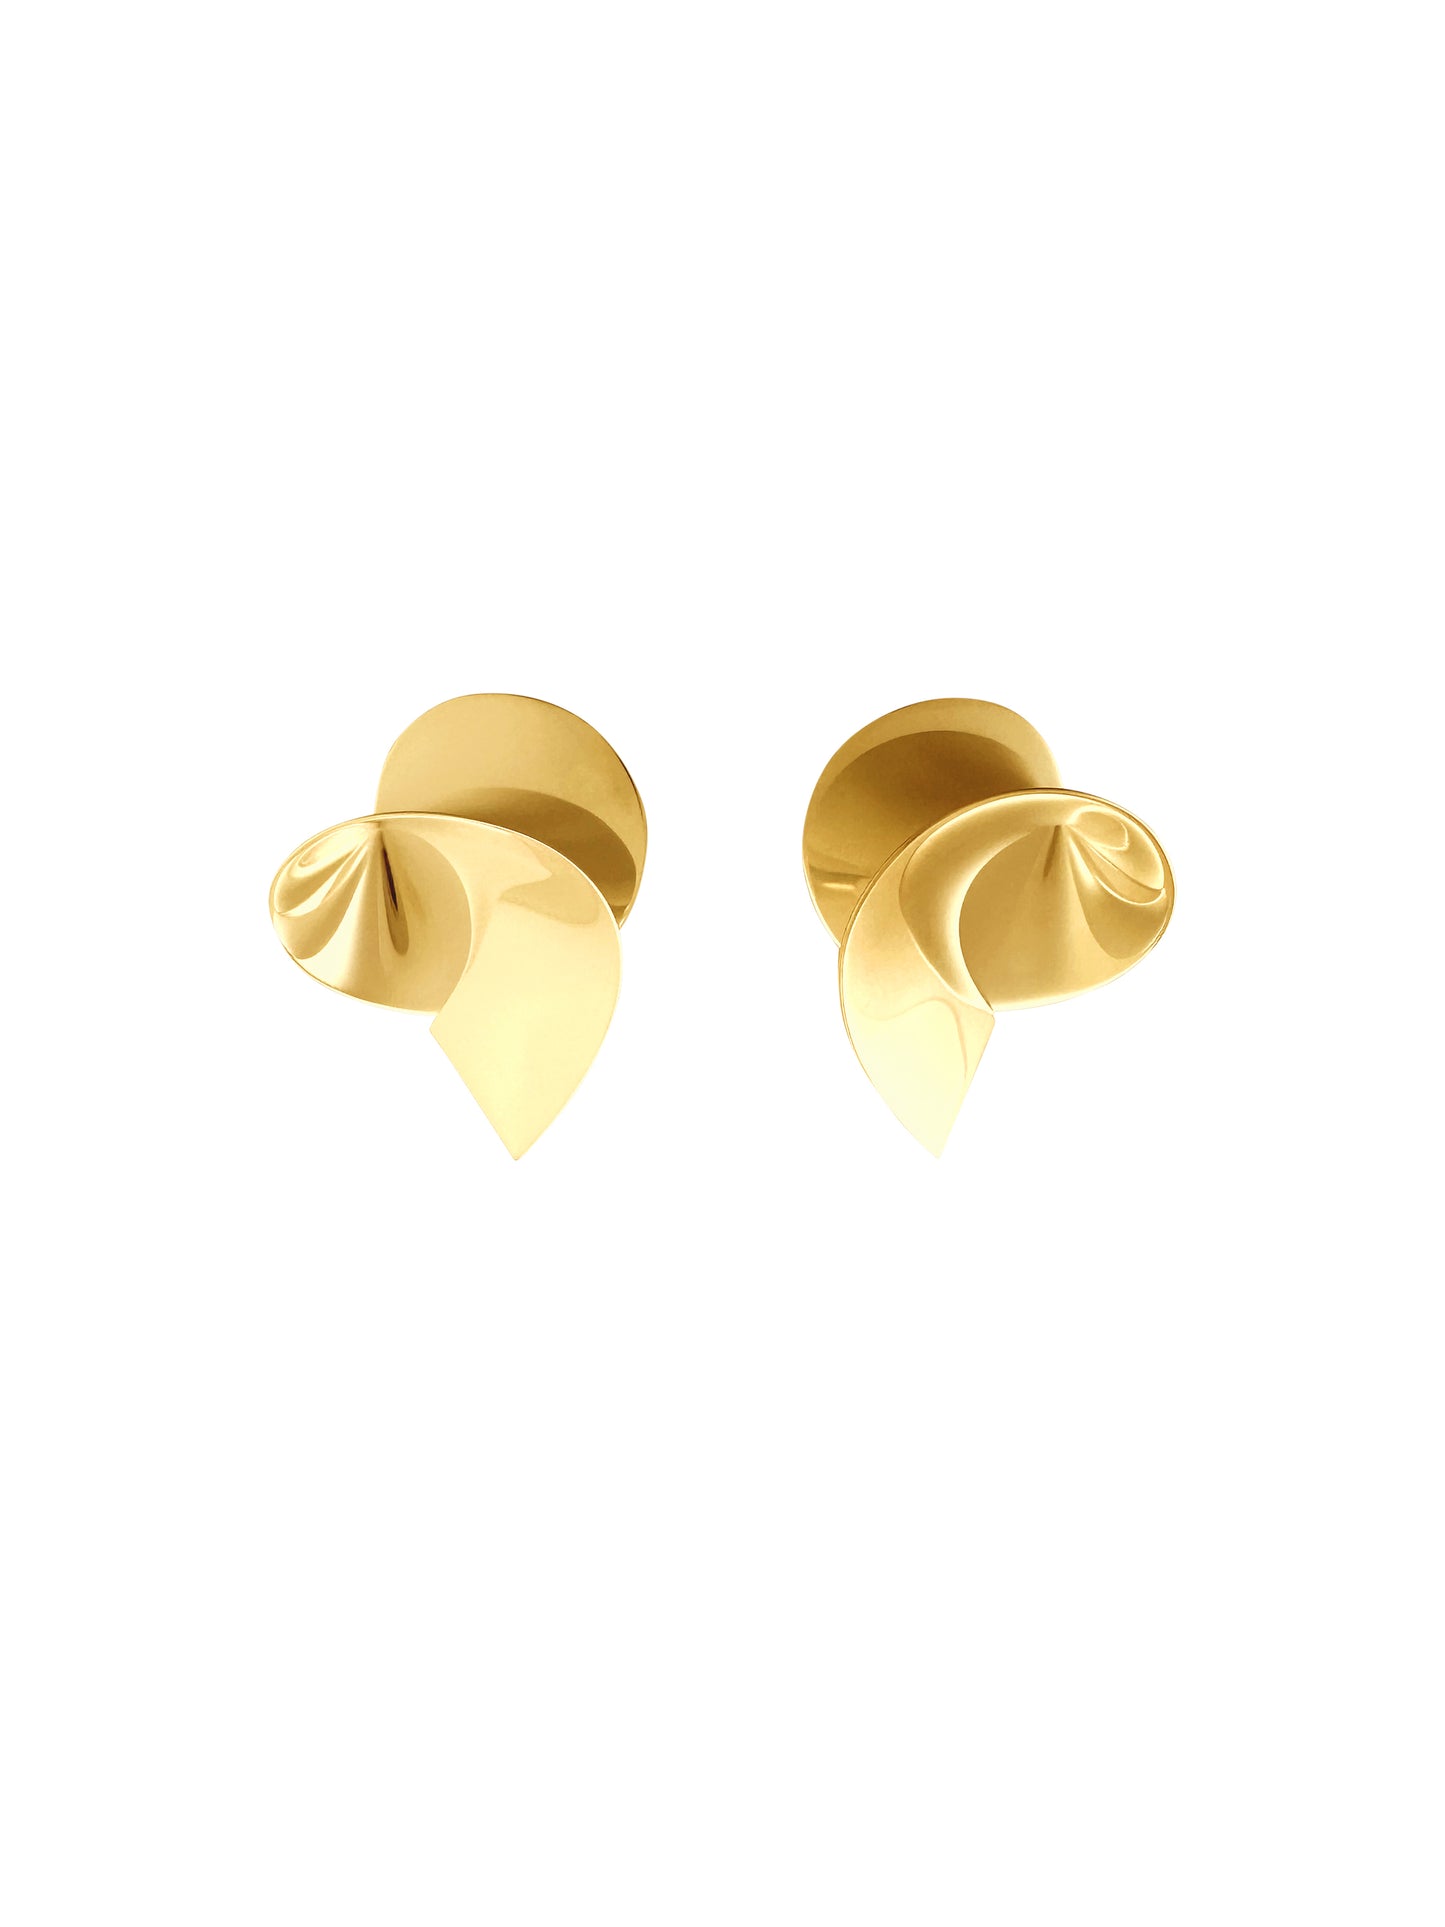 Coil earrings in gold vermeil by Sara Robertsson Jewellery